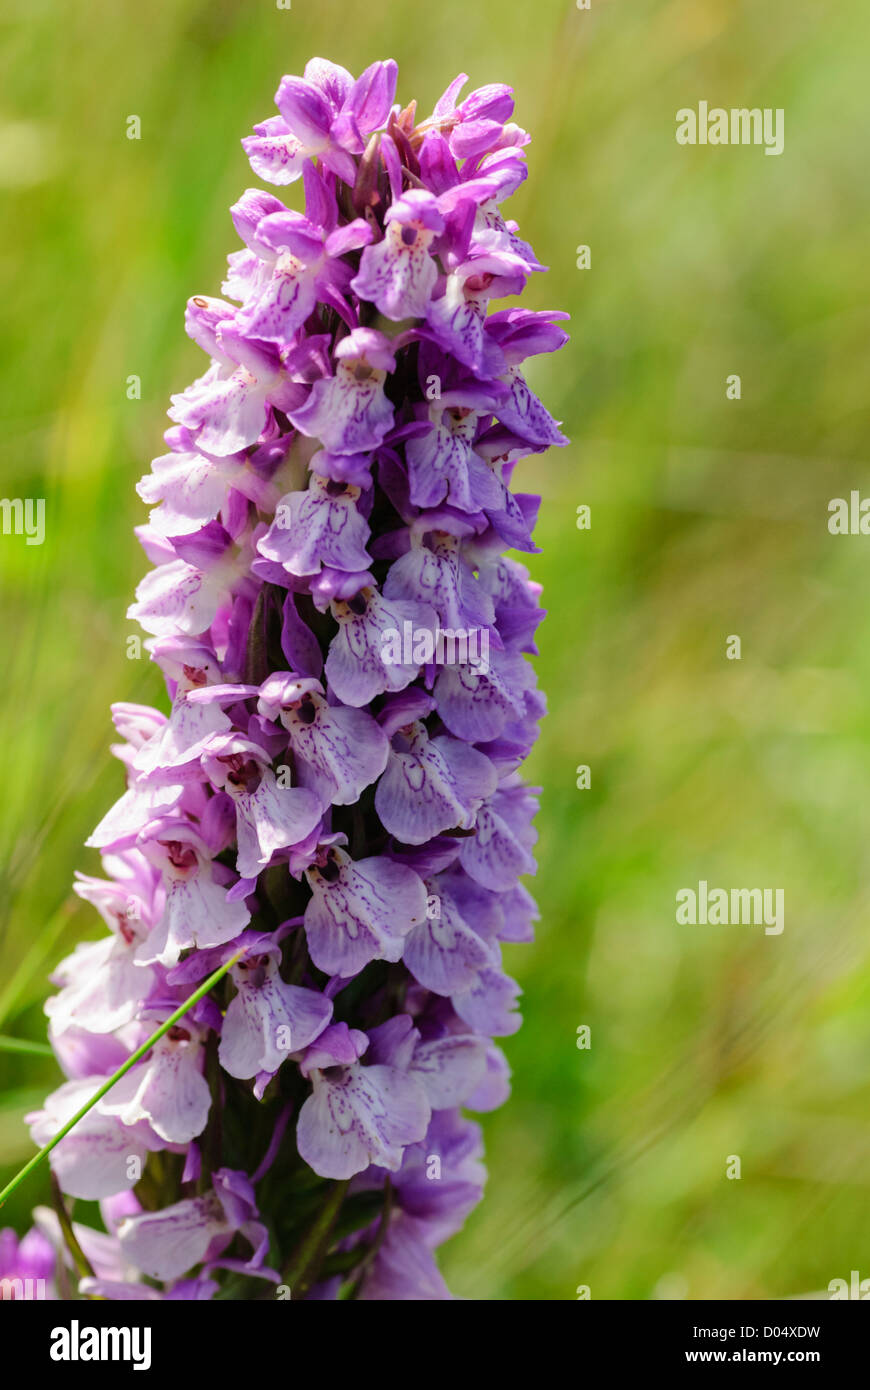 Southern Marsh Orchid, Dactylorhiza praetermissa, Tegeirian y Gors Deheulog in Welsh, at Kenfig Burrows. A possible hybrid. Stock Photo